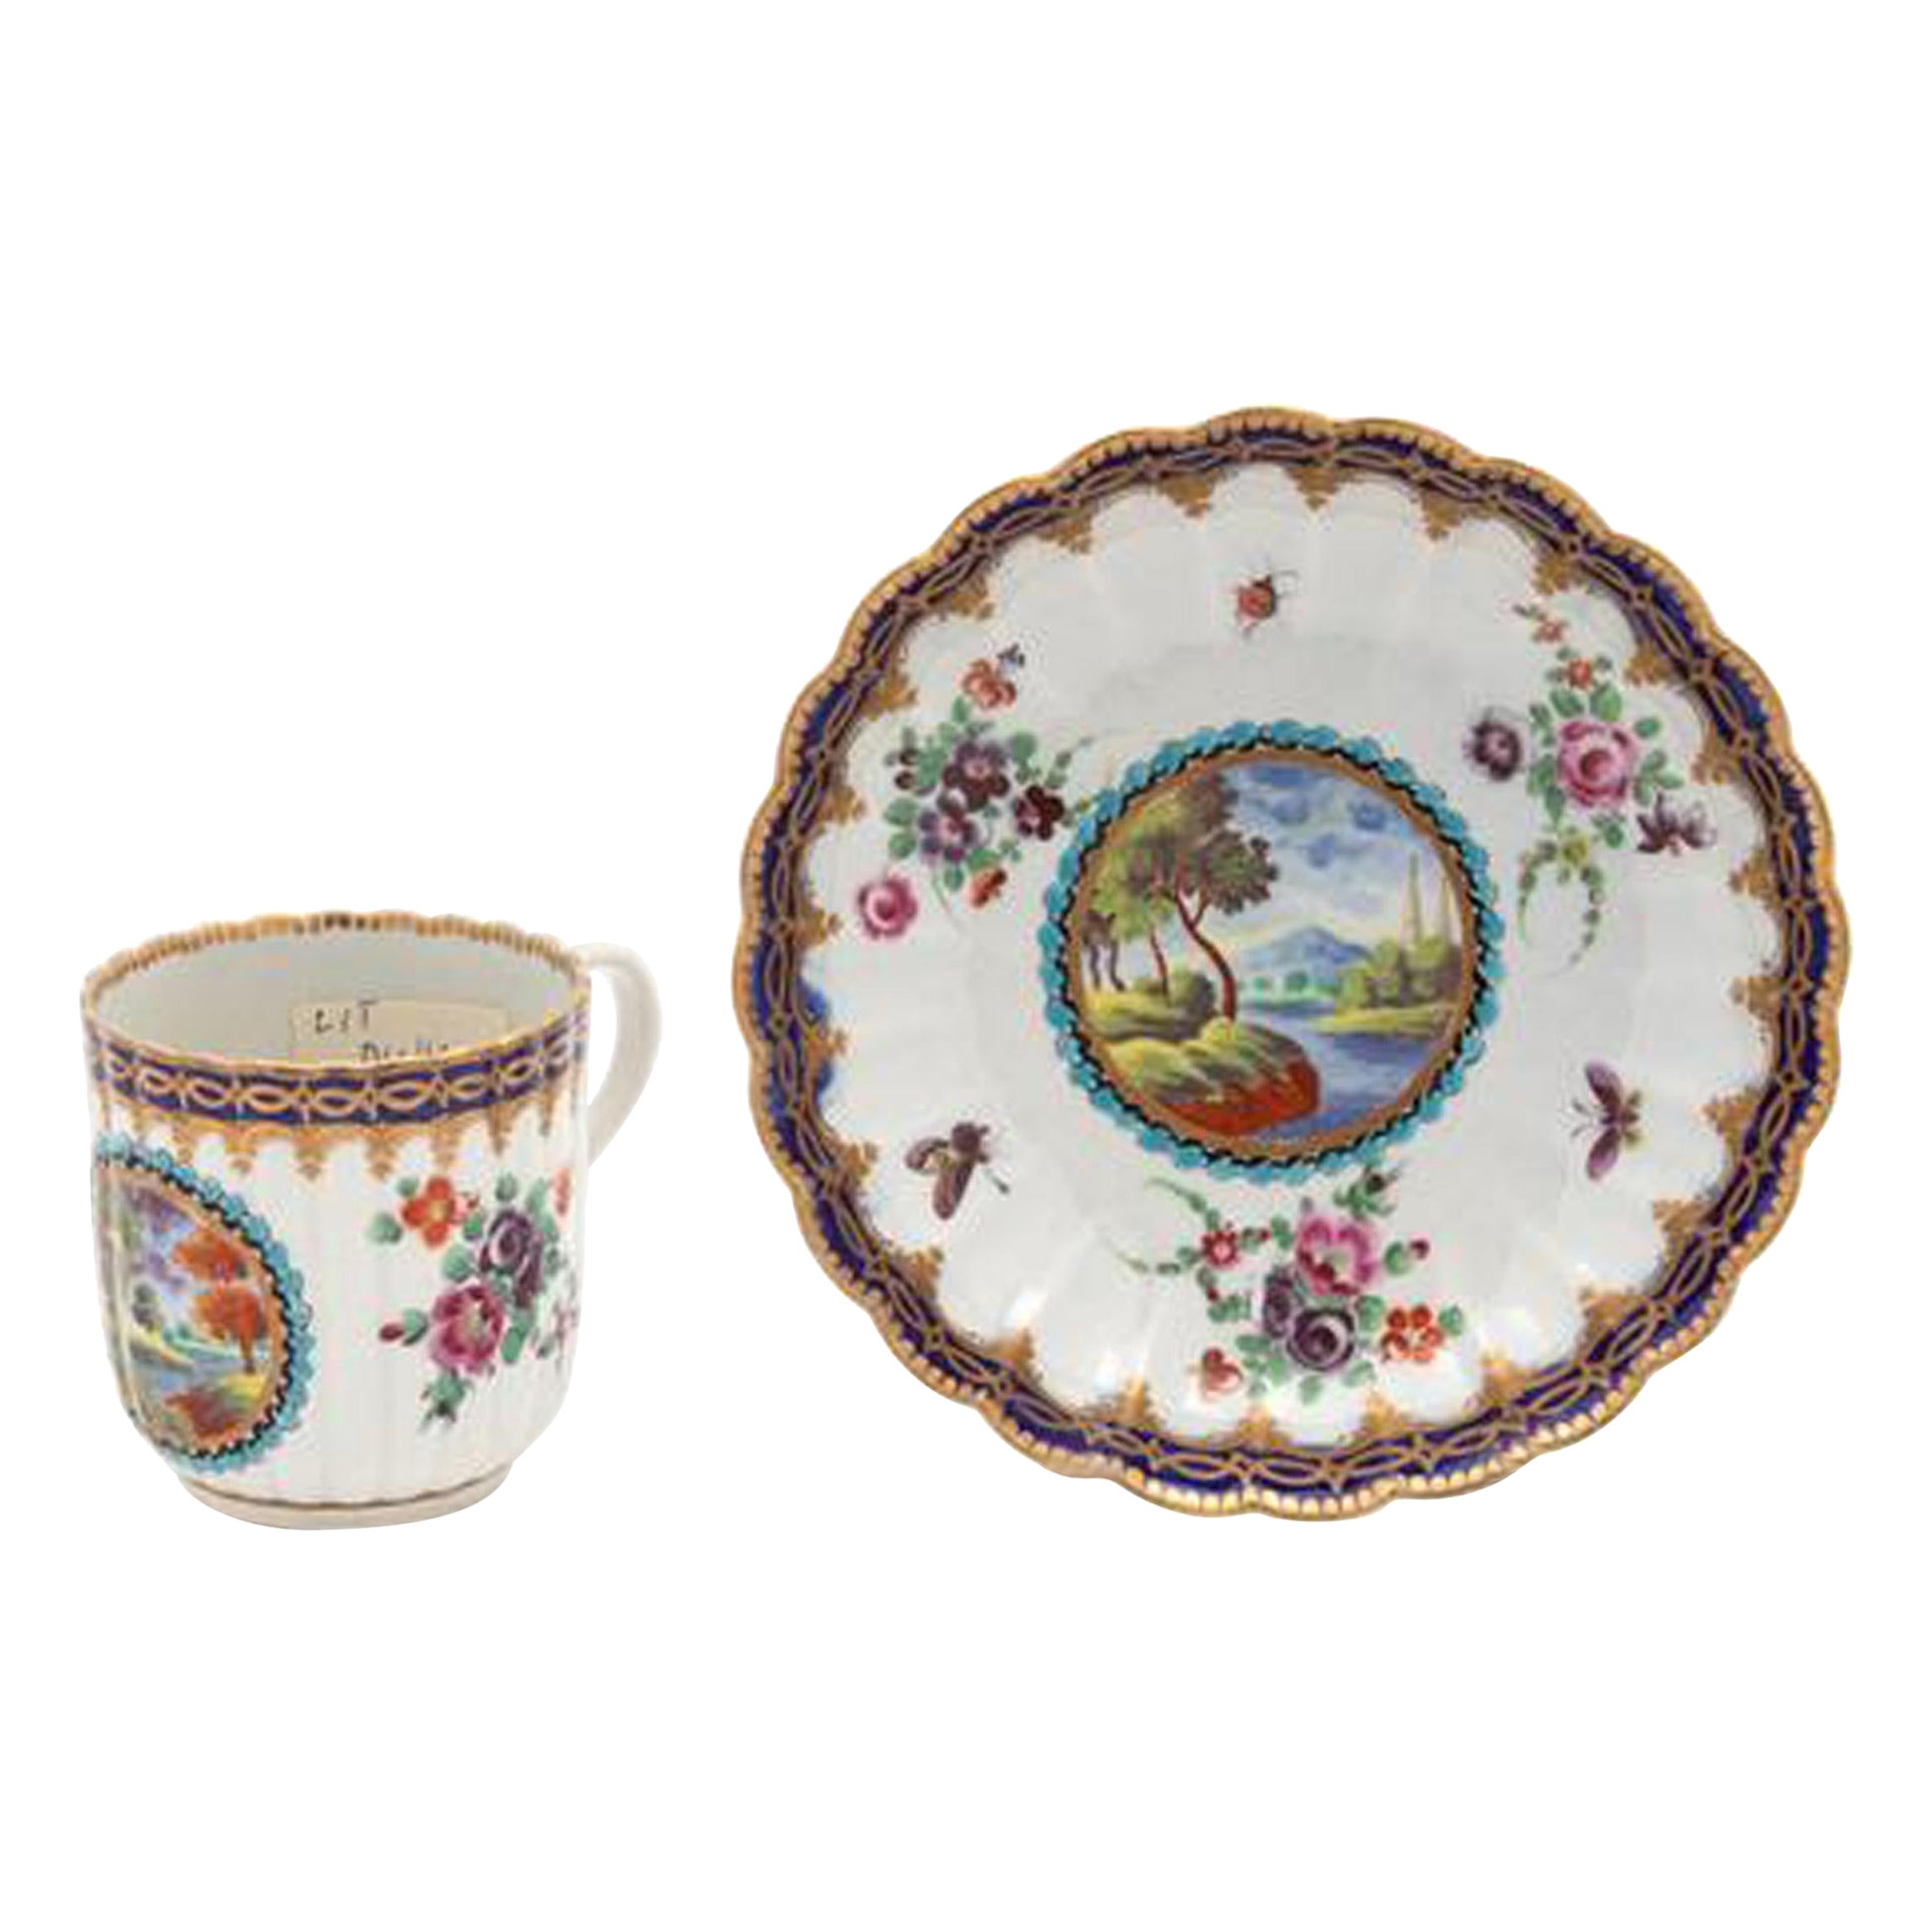 18th Century First Period Worcester Porcelain Coffee Can and Saucer